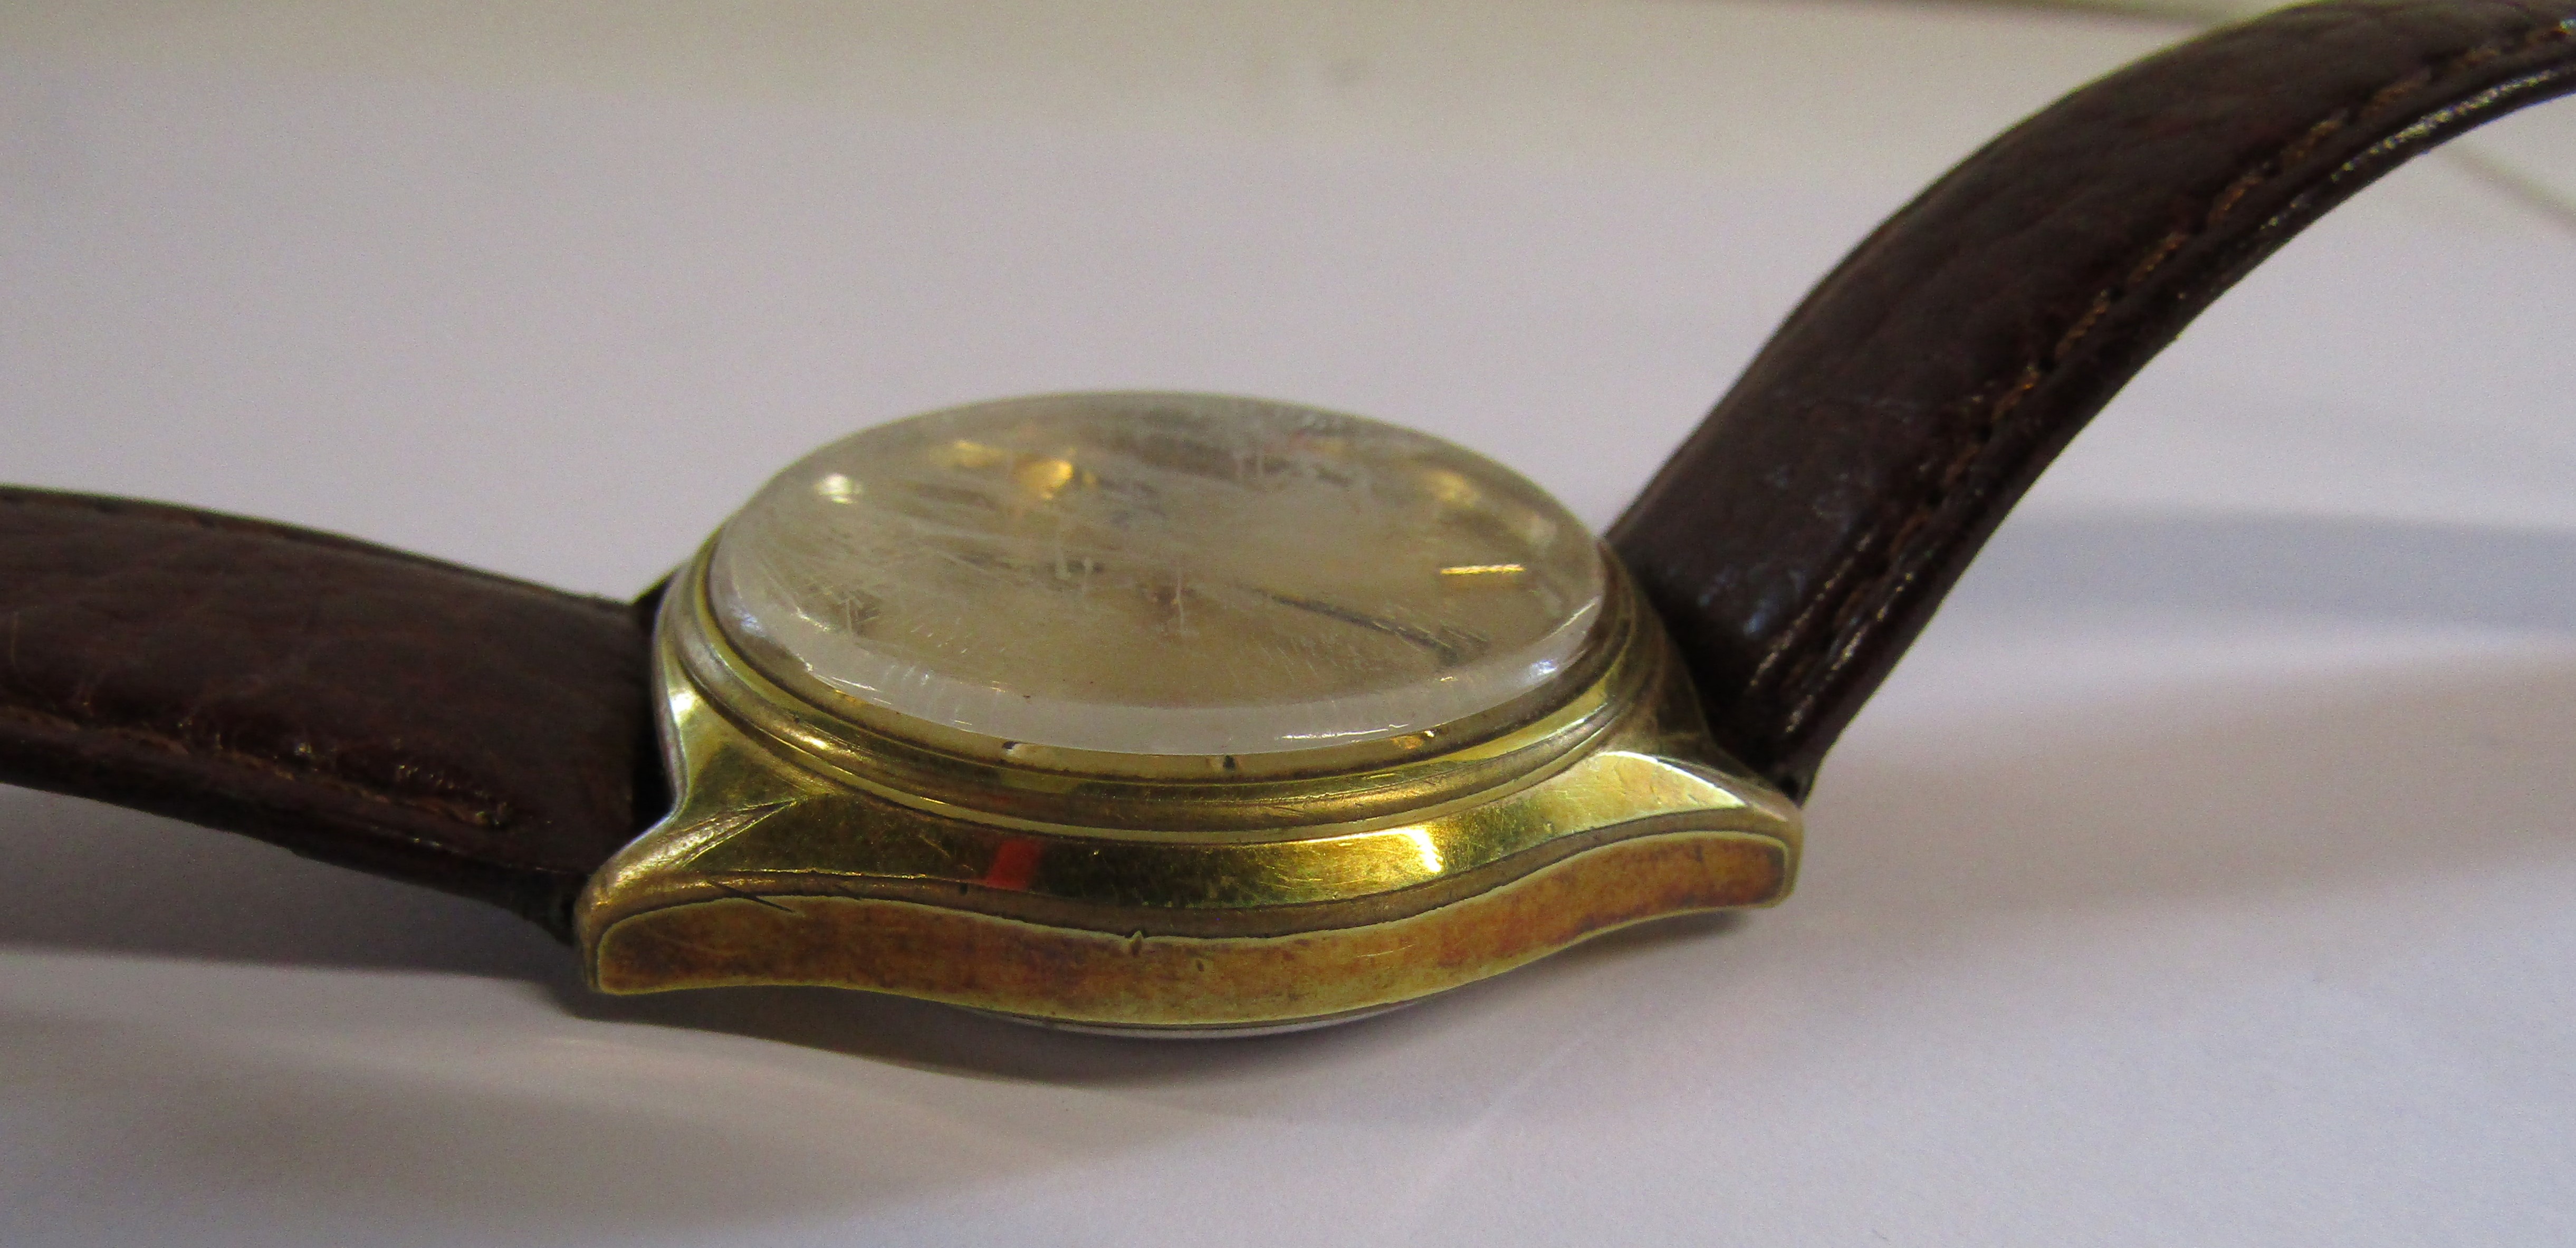 Omega Gold Plated Wristwatch - Image 4 of 5